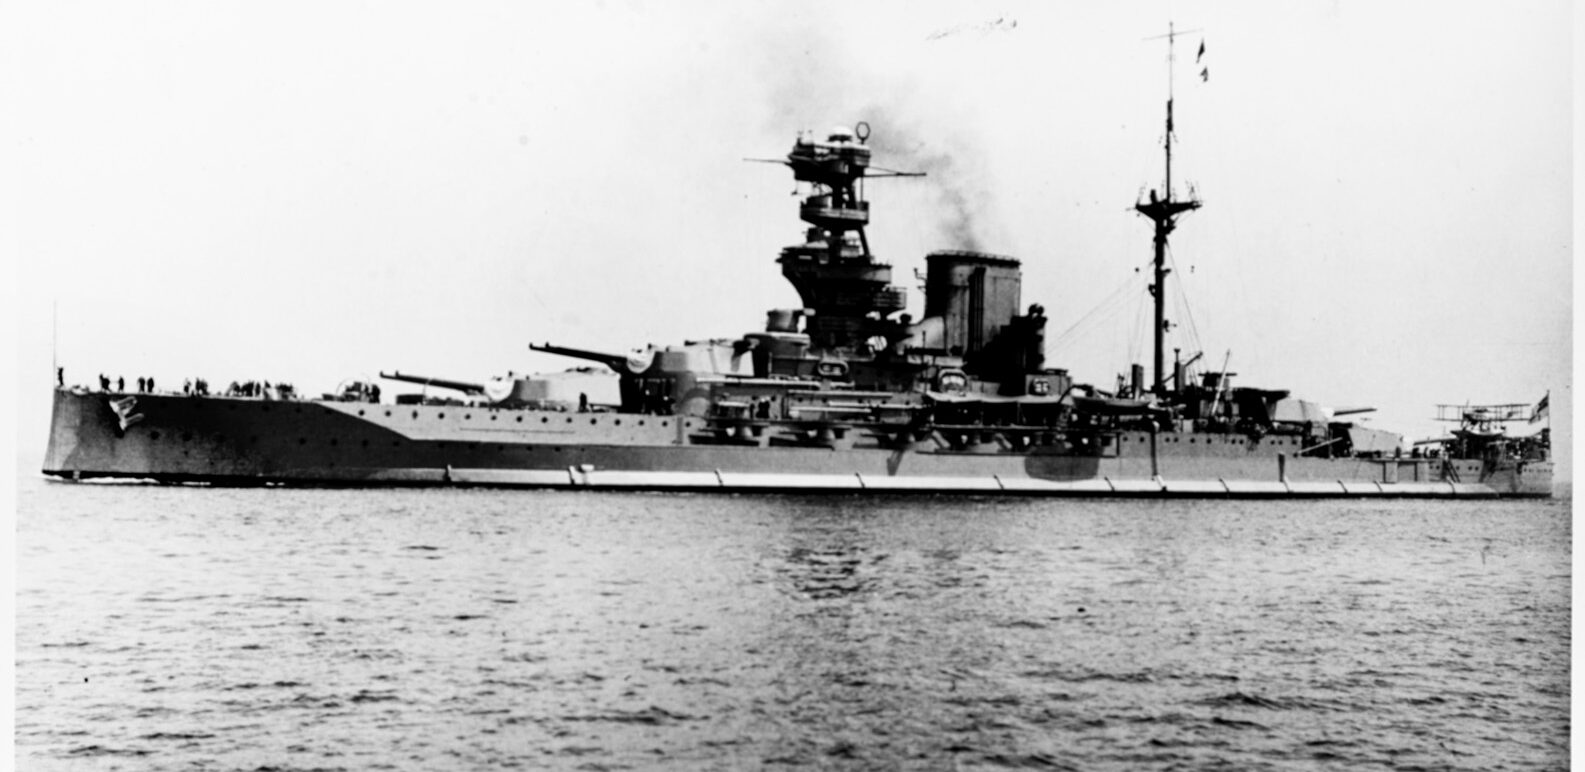 The battleship HMS Valiant makes headway at sea.  Philip was commended for his handling of one of the British searchlights on Valiant during the Battle of Cape Matapan in March 1941. 